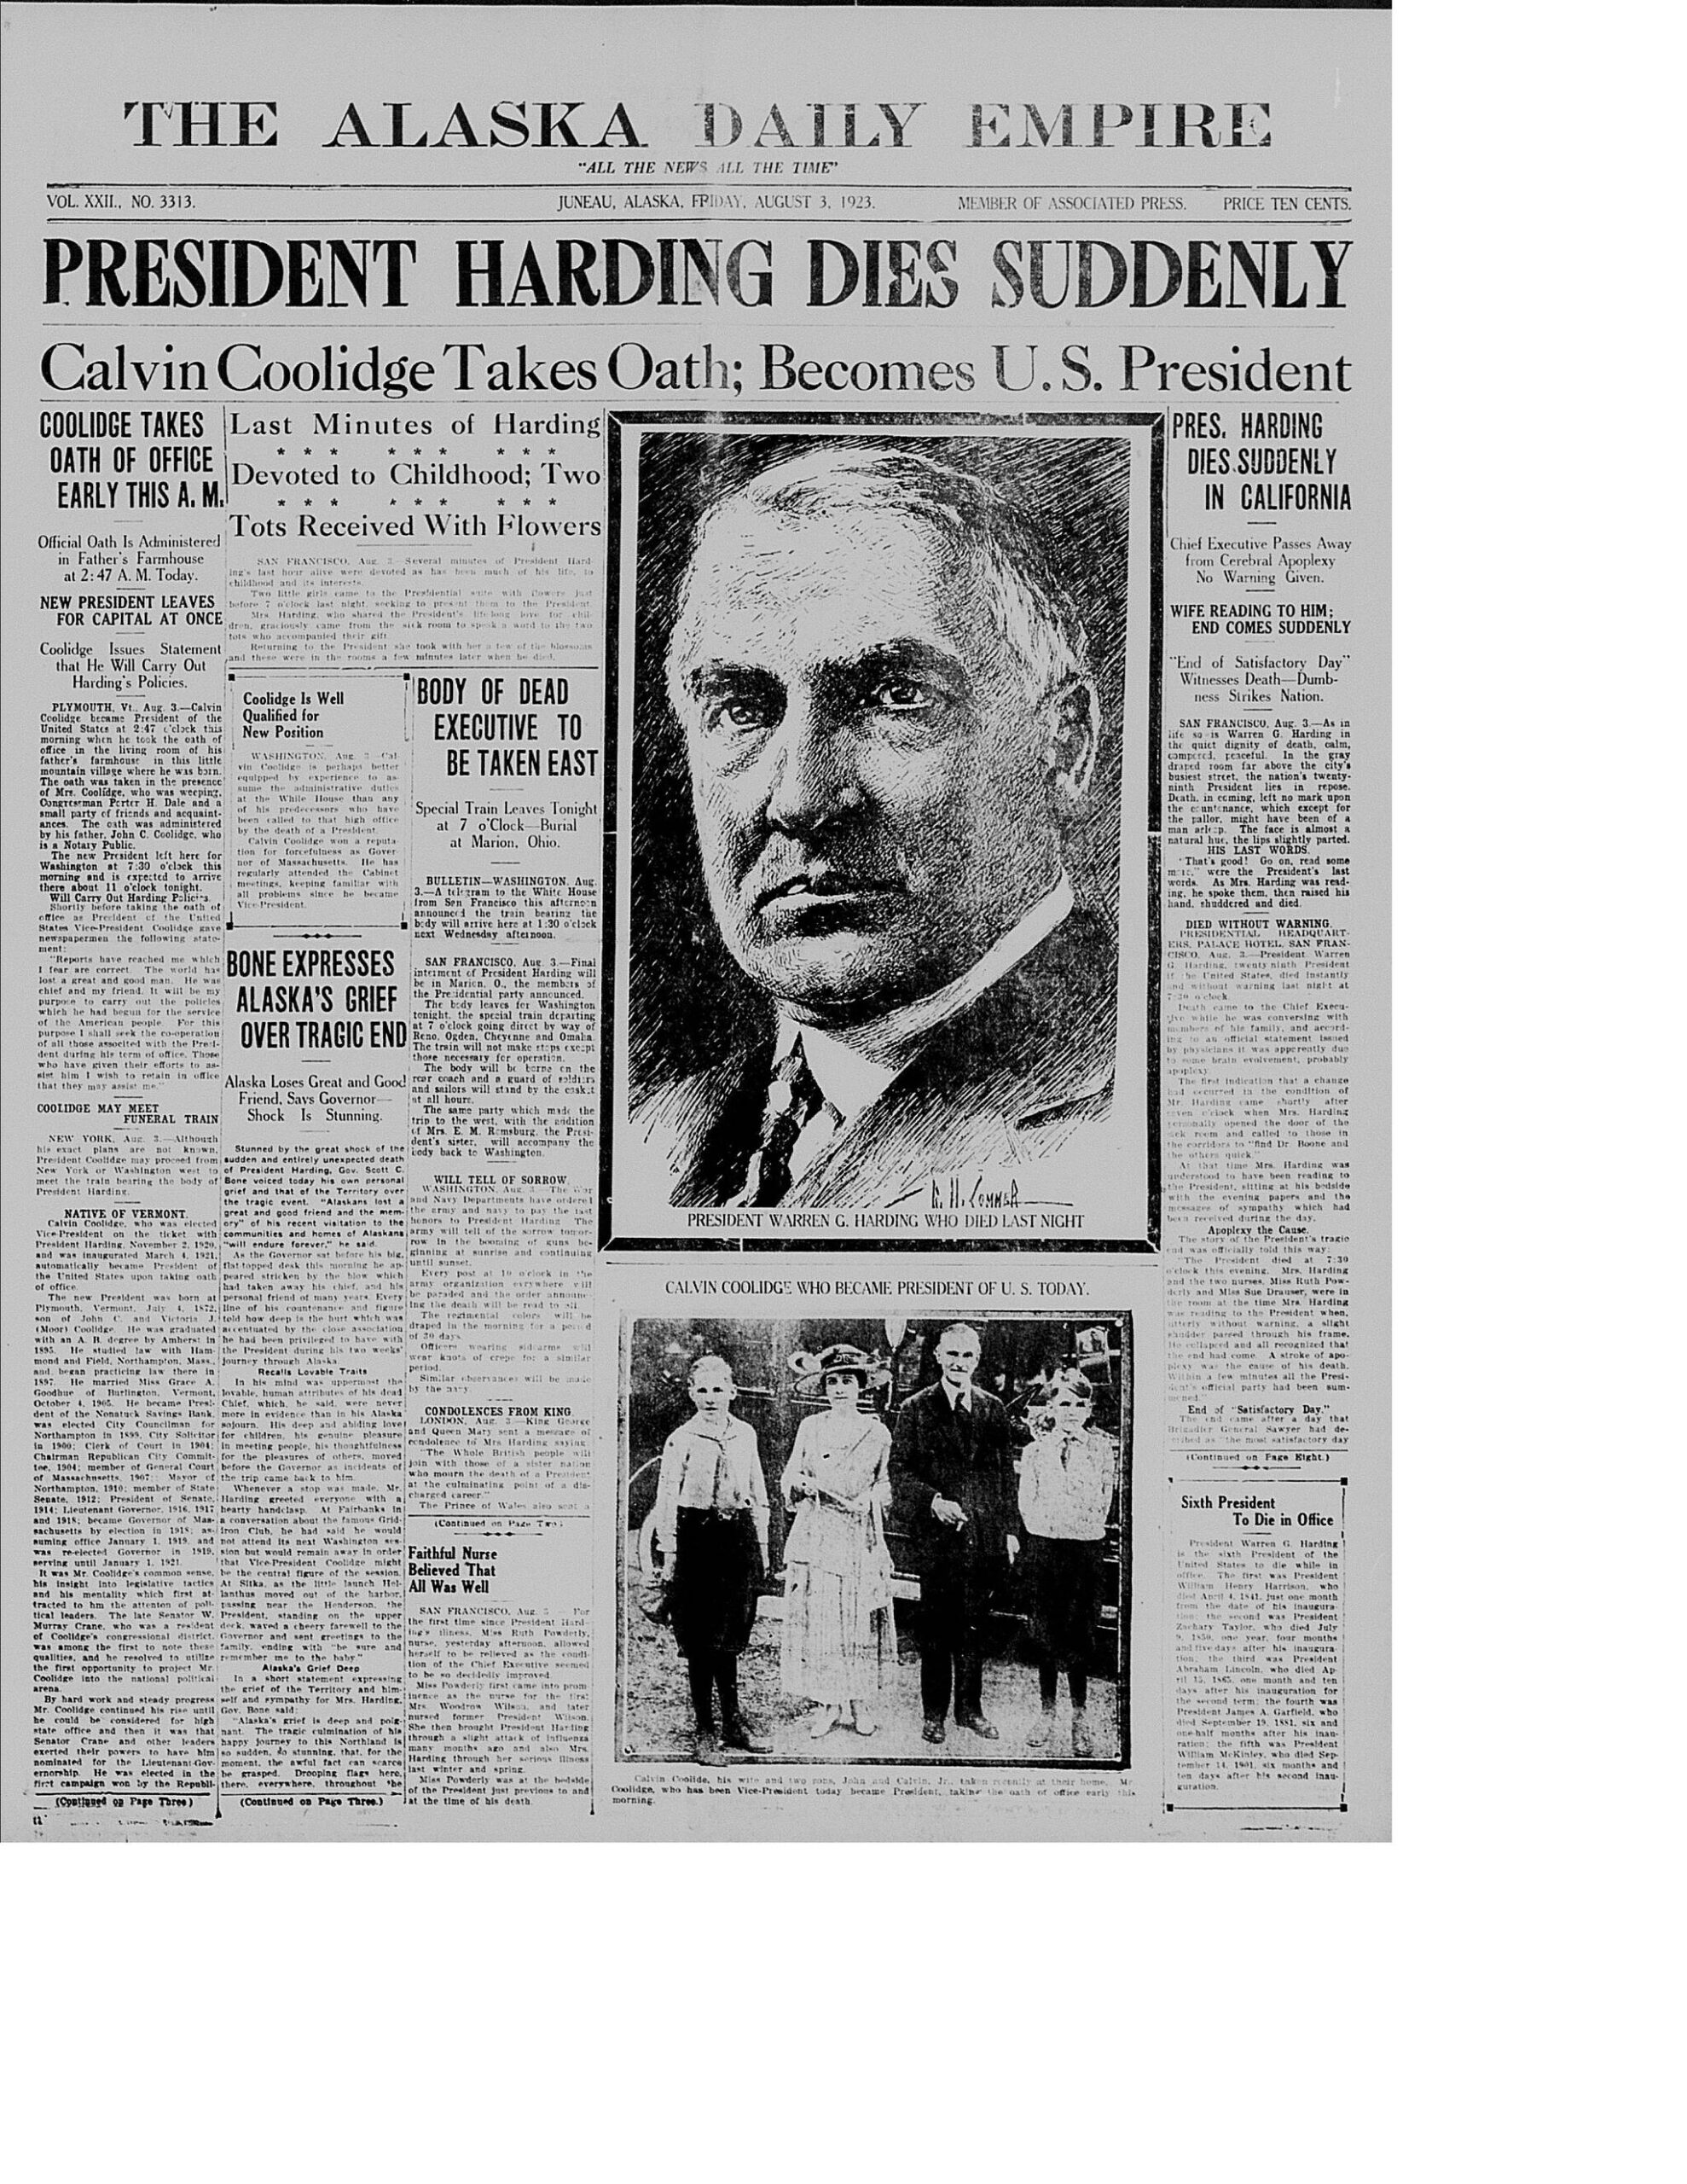 Three weeks after visiting Juneau and other Alaska destinations in 1923, President Warren G. Harding died suddenly in San Francisco at the end of his tour. This is the front page of the Alaska Daily Empire on Aug. 3, 1923, describing his death from cerebral apoplexy, or a stroke.